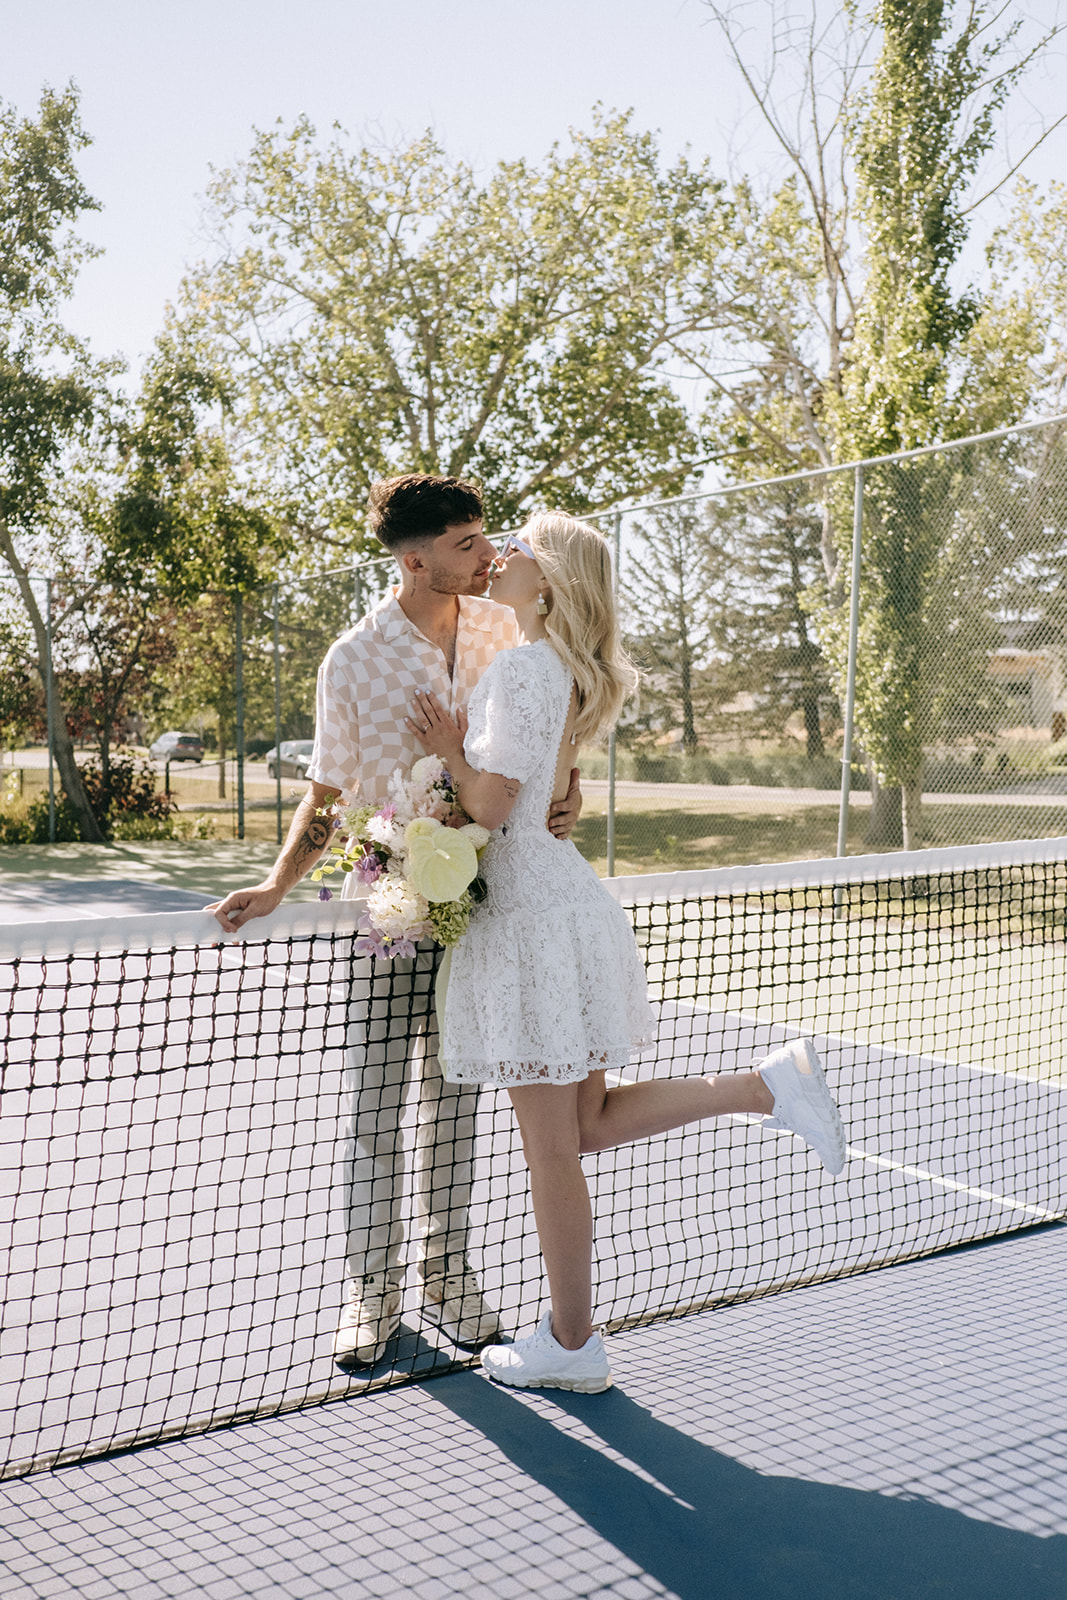 Modern runaway bride sporting white bridal sneakers in couples portraits, tennis-themed wedding portrait inspiration, relaxed and casual groom attire in neutral tones of beige and tan